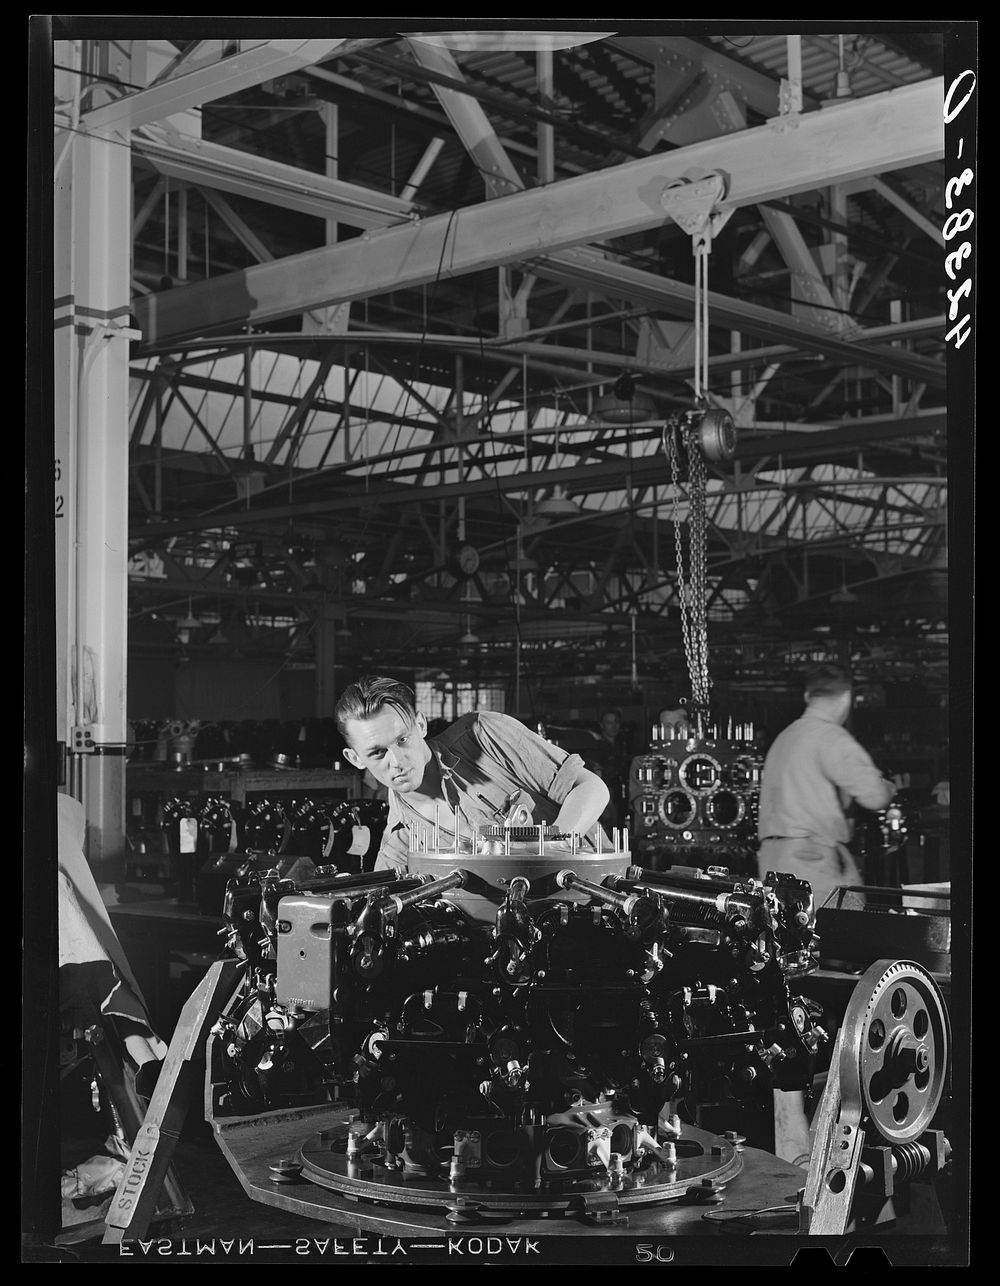 Winging on the final stages of a Pratt and Whitney Aircraft motor at East Hartford, Connecticut. Sourced from the Library of…